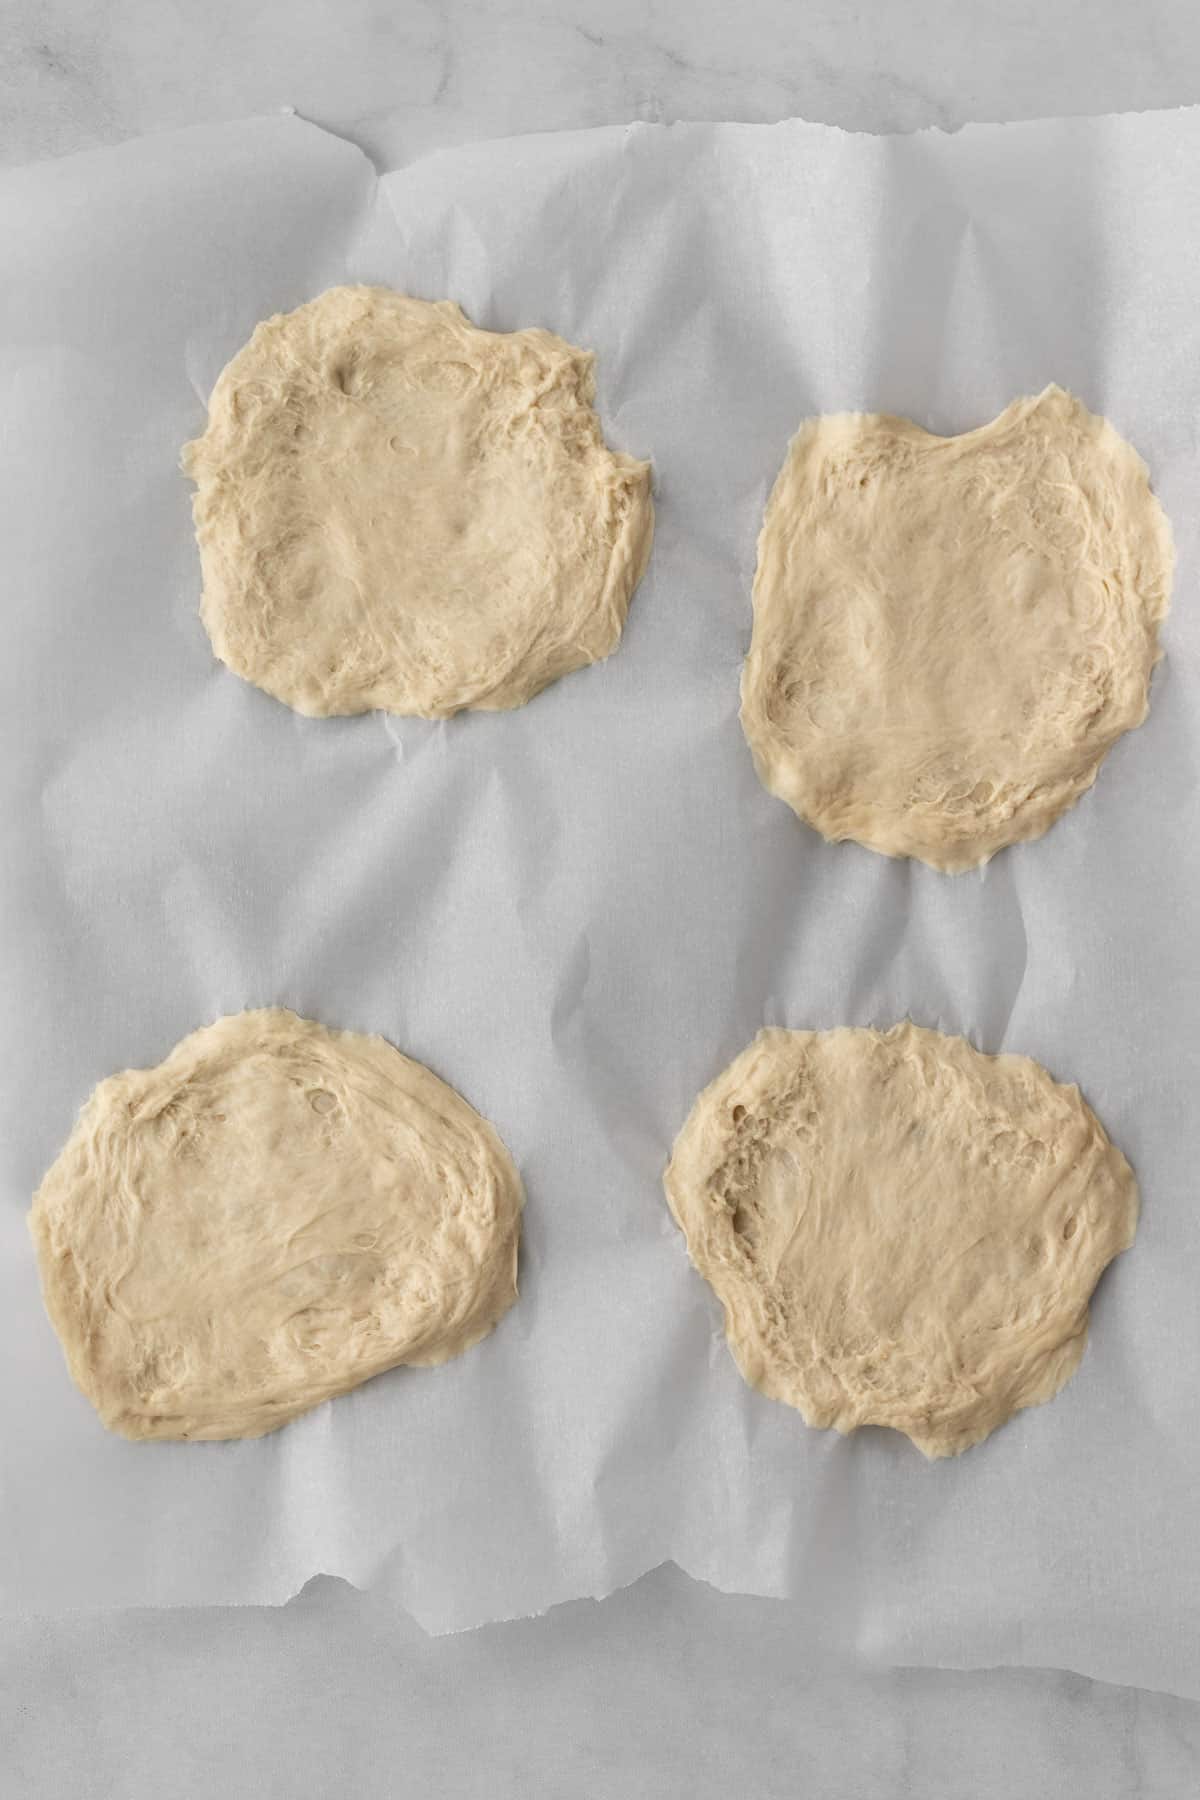 4 flattened balls of dough on a piece of parchment paper.